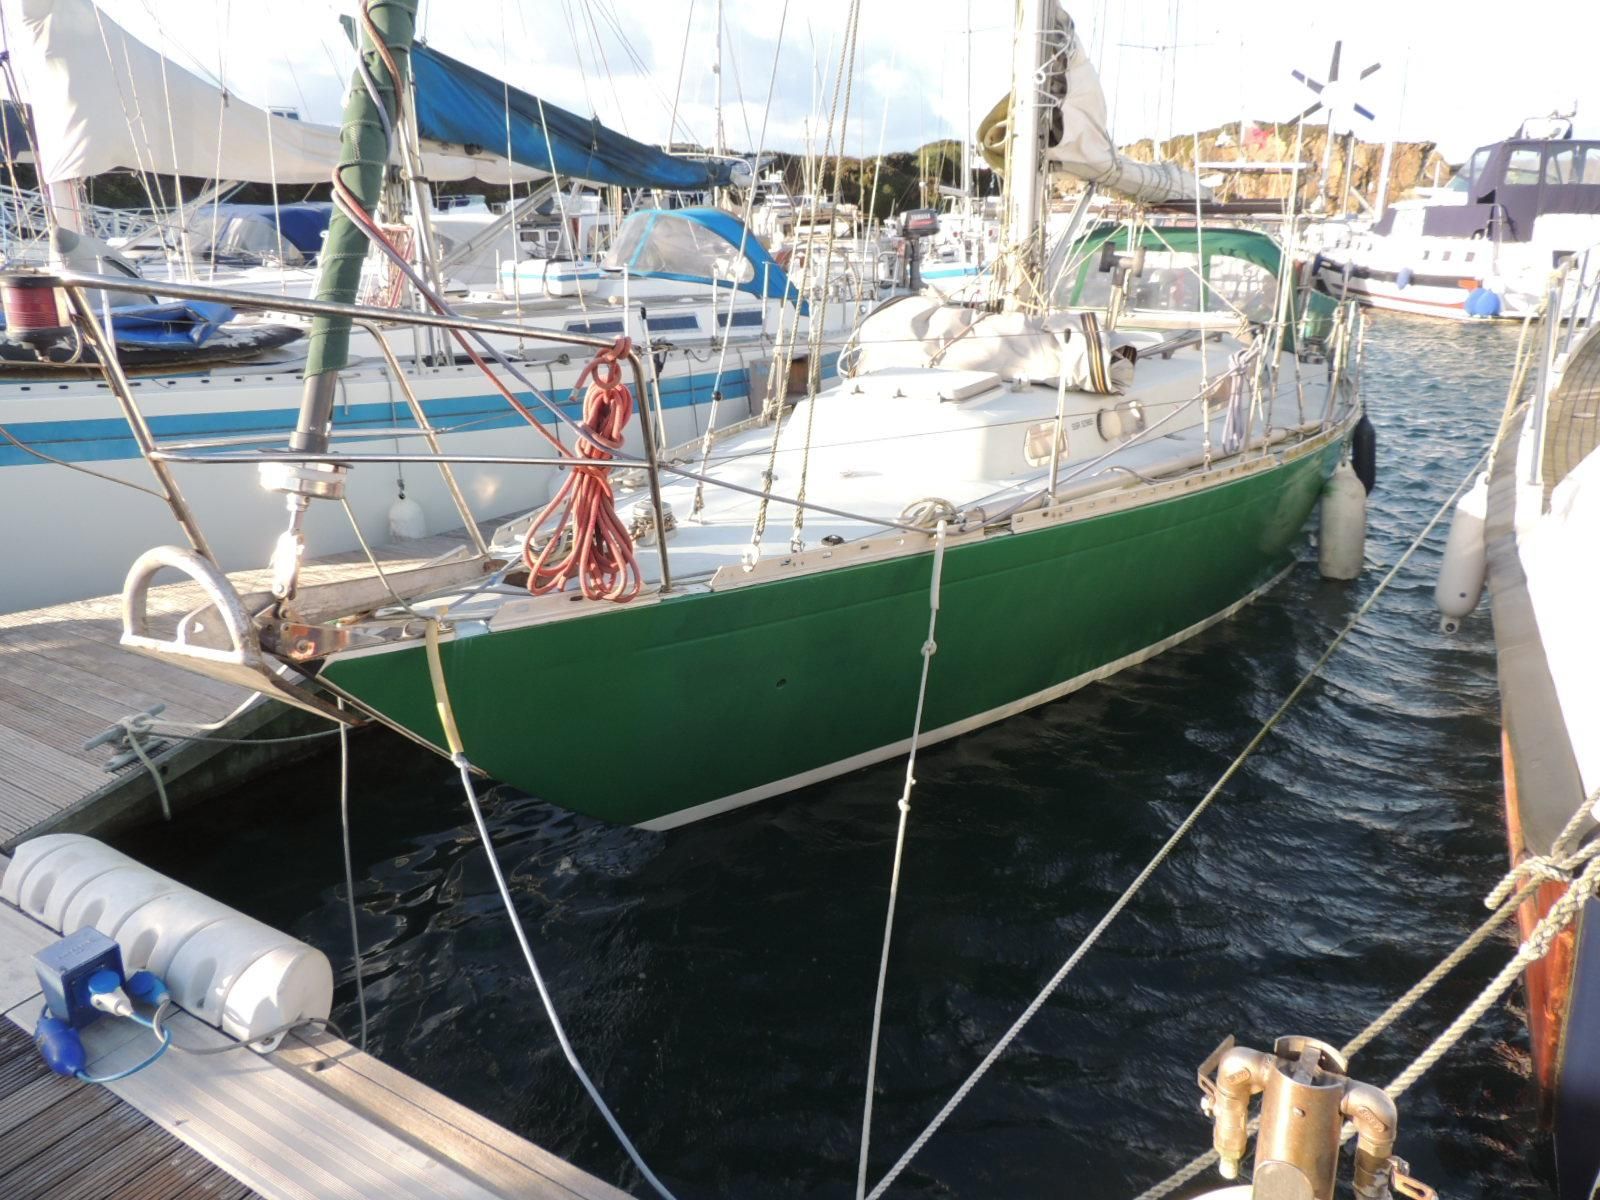 38 ft yacht for sale uk